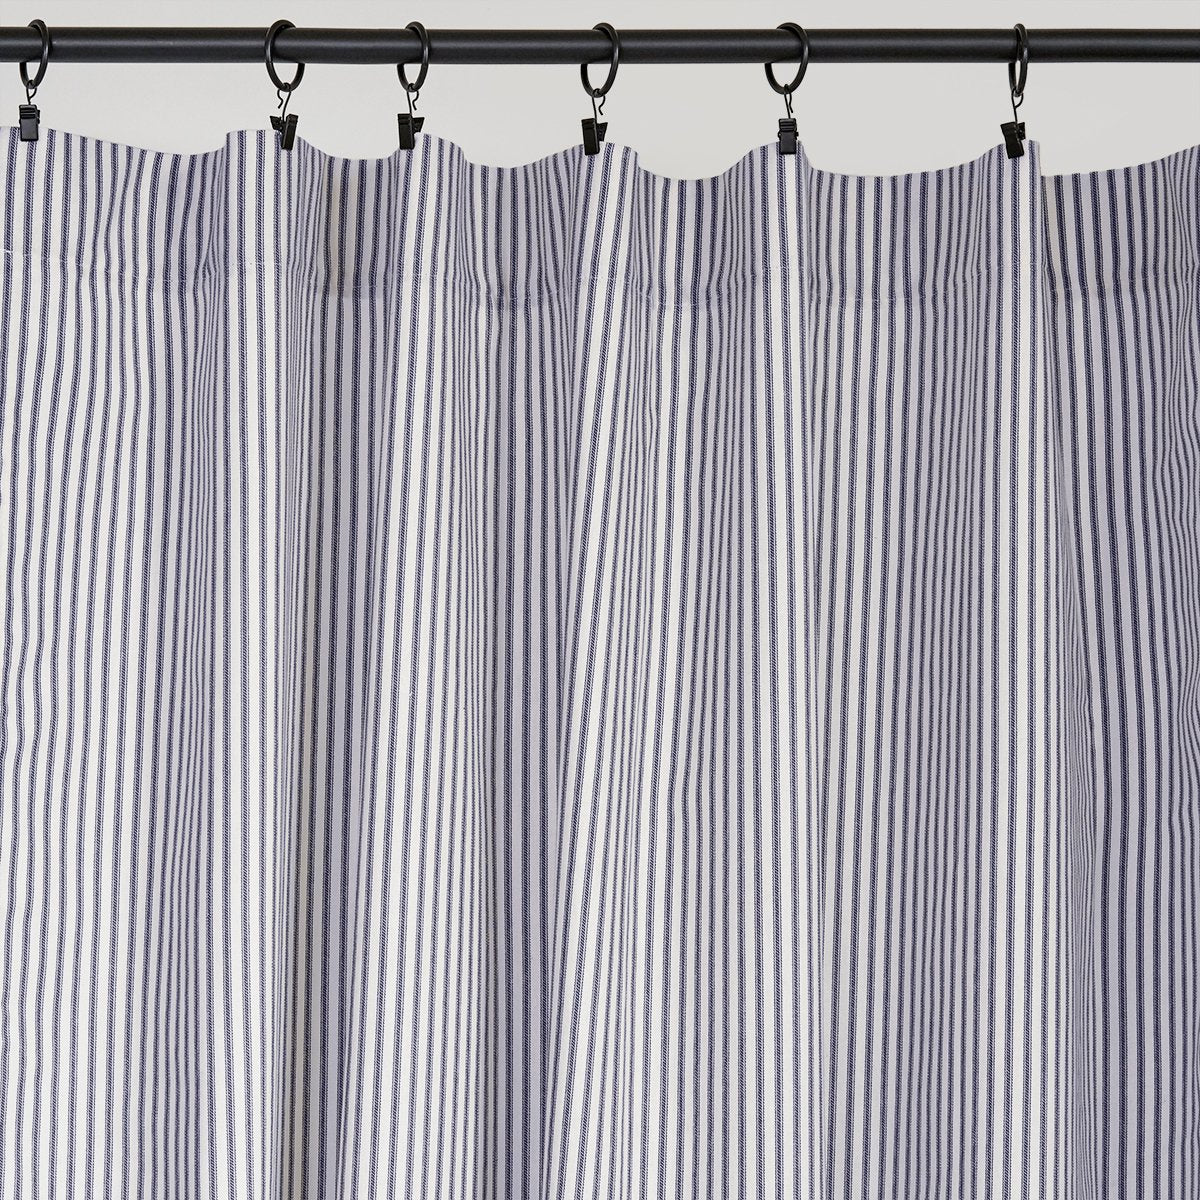 Ticking Stripe Curtain Panel | 5 Colors Available